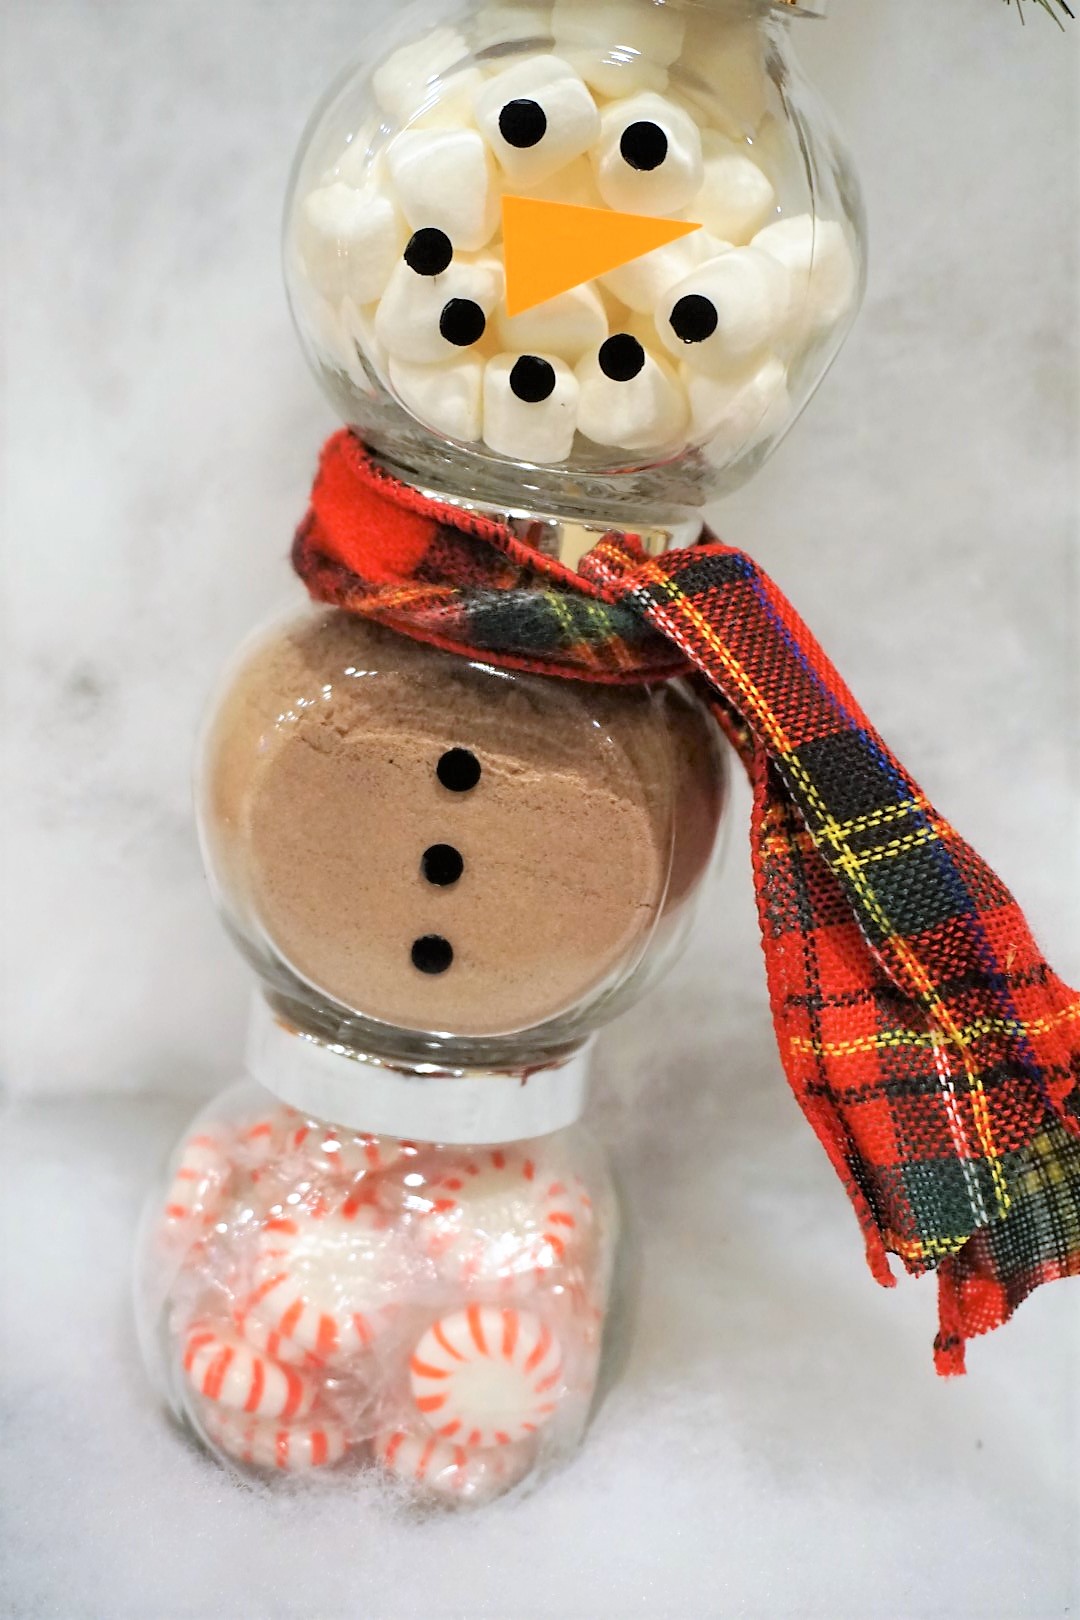  Make glass jars into a Snowman Cocoa Kit by cutting out a vinyl face and buttons by hand or using a Cricut. 